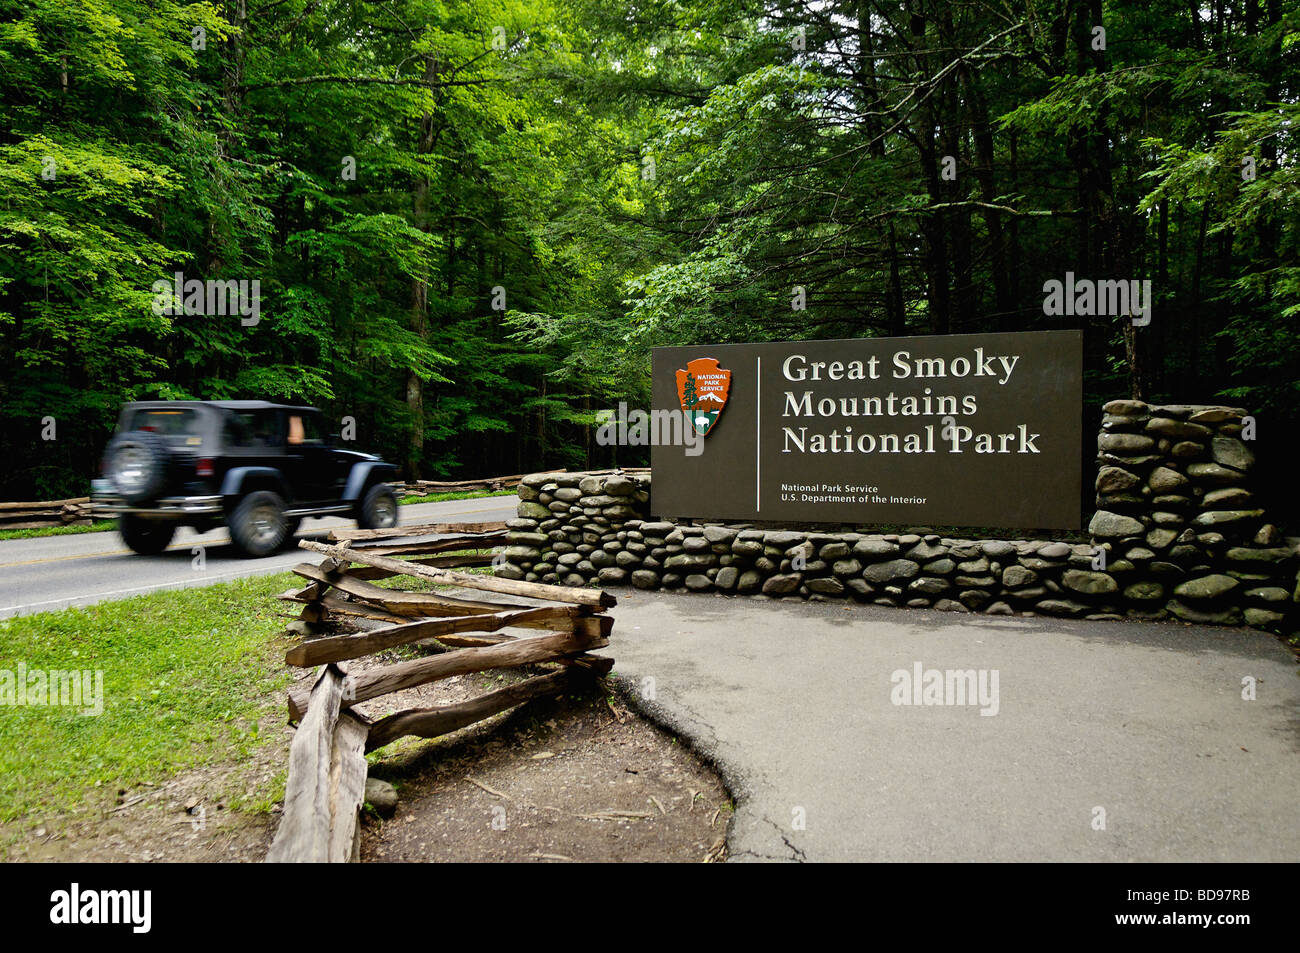 Jeep with Motion Blur Driving Past the Entrance Sign to the Great Smoky Mountains National Park on Route 441 in Tennessee Stock Photo